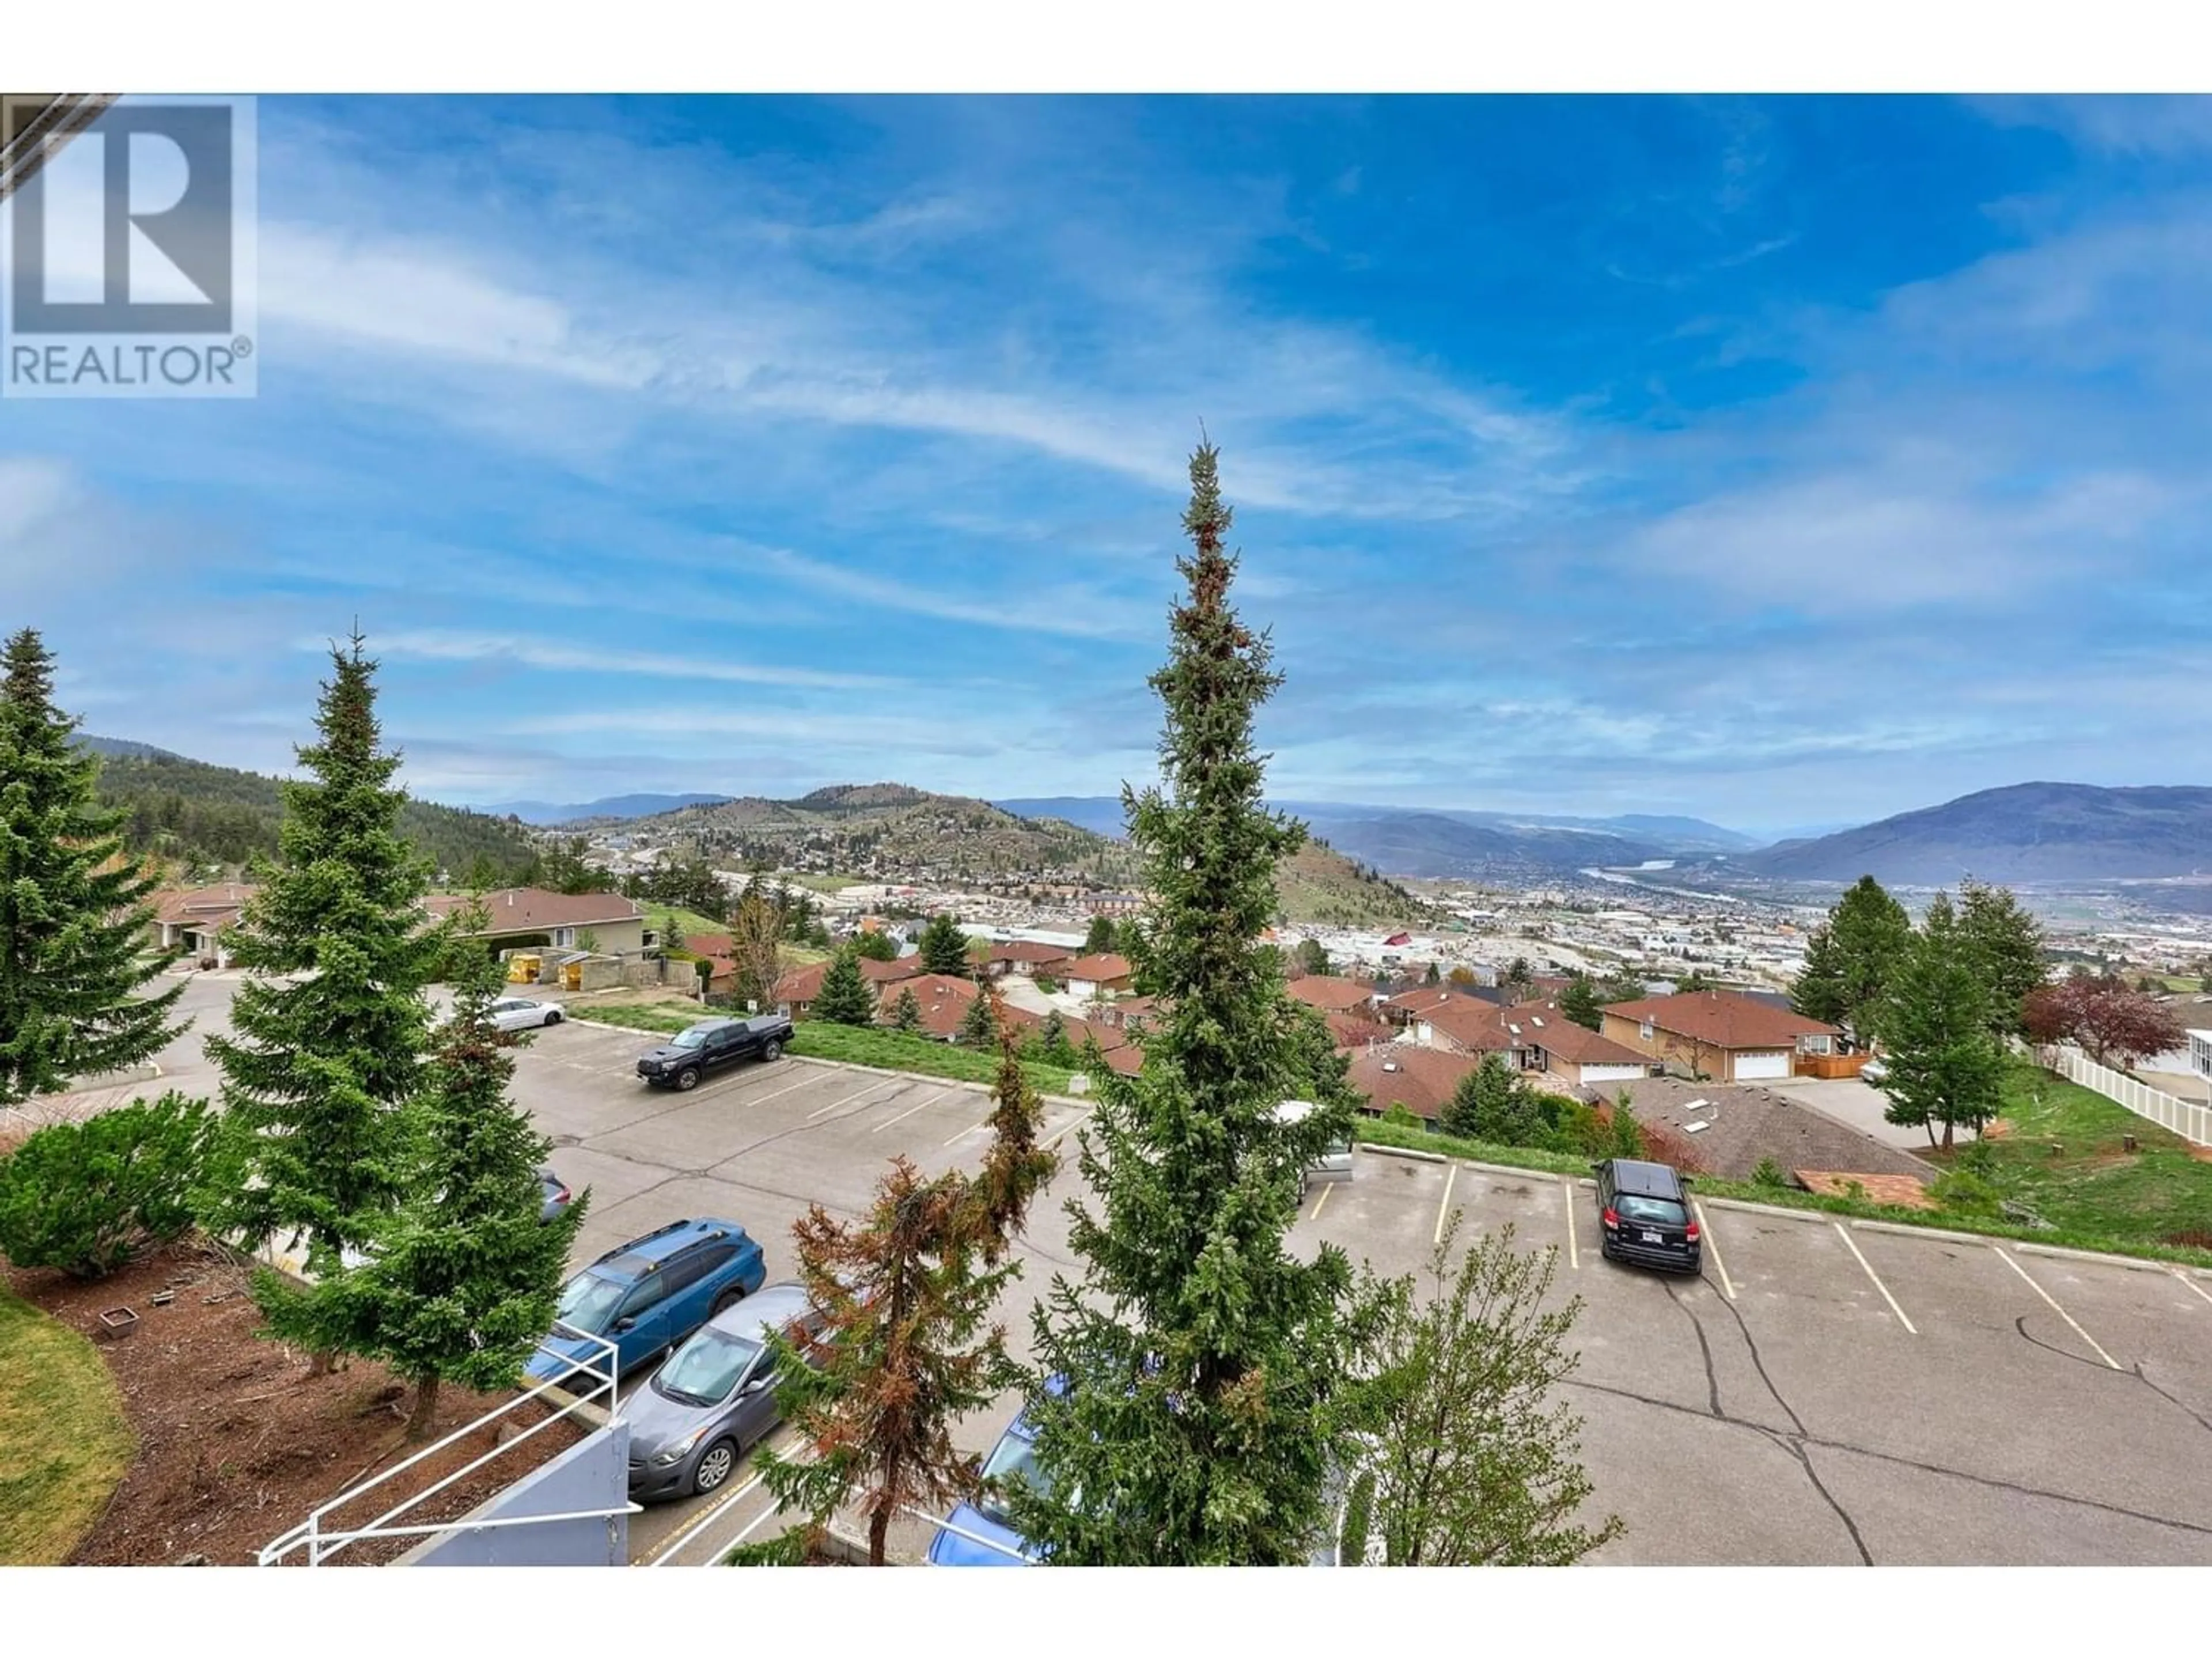 A pic from exterior of the house or condo for 304-2025 PACIFIC WAY, Kamloops British Columbia V1S1V2